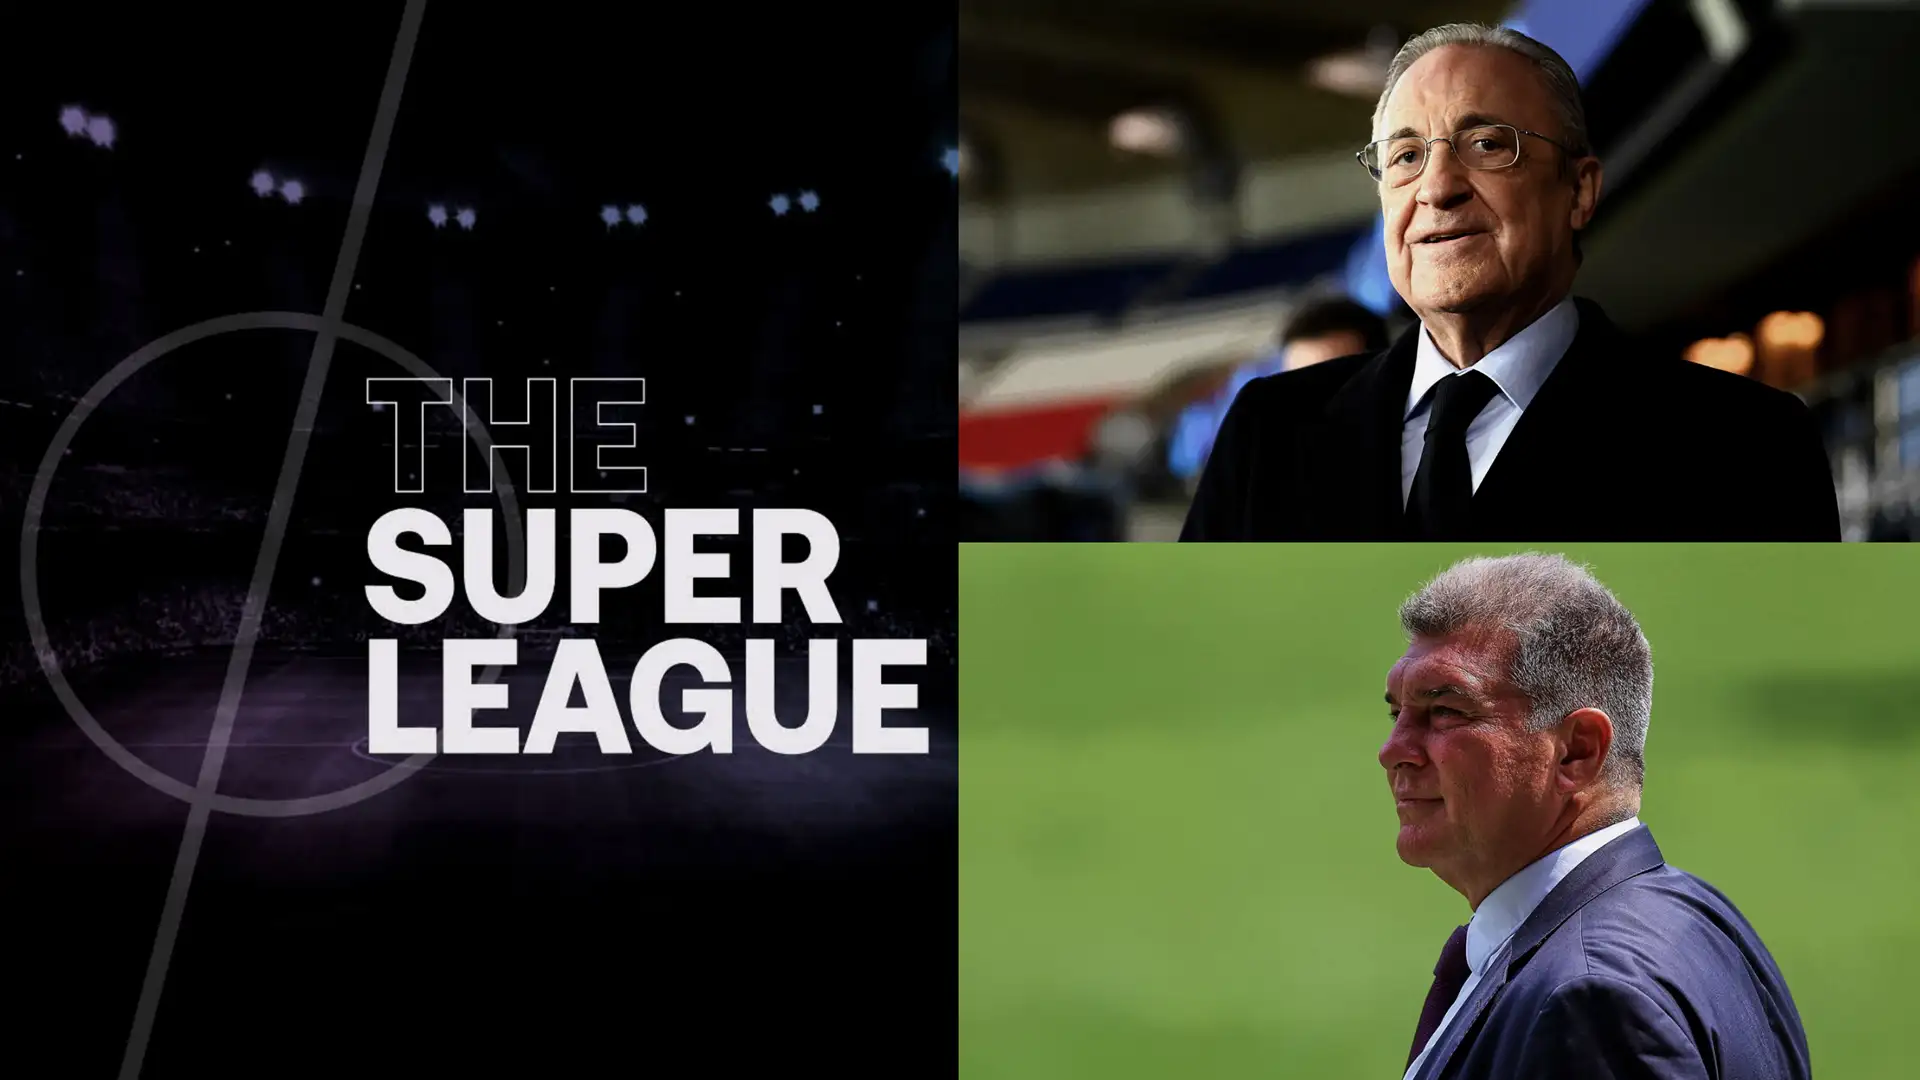 European Super League given huge boost as court says UEFA and FIFA abused their power - but governing body denies Real Madrid & Barcelona have green light to revive controversial project